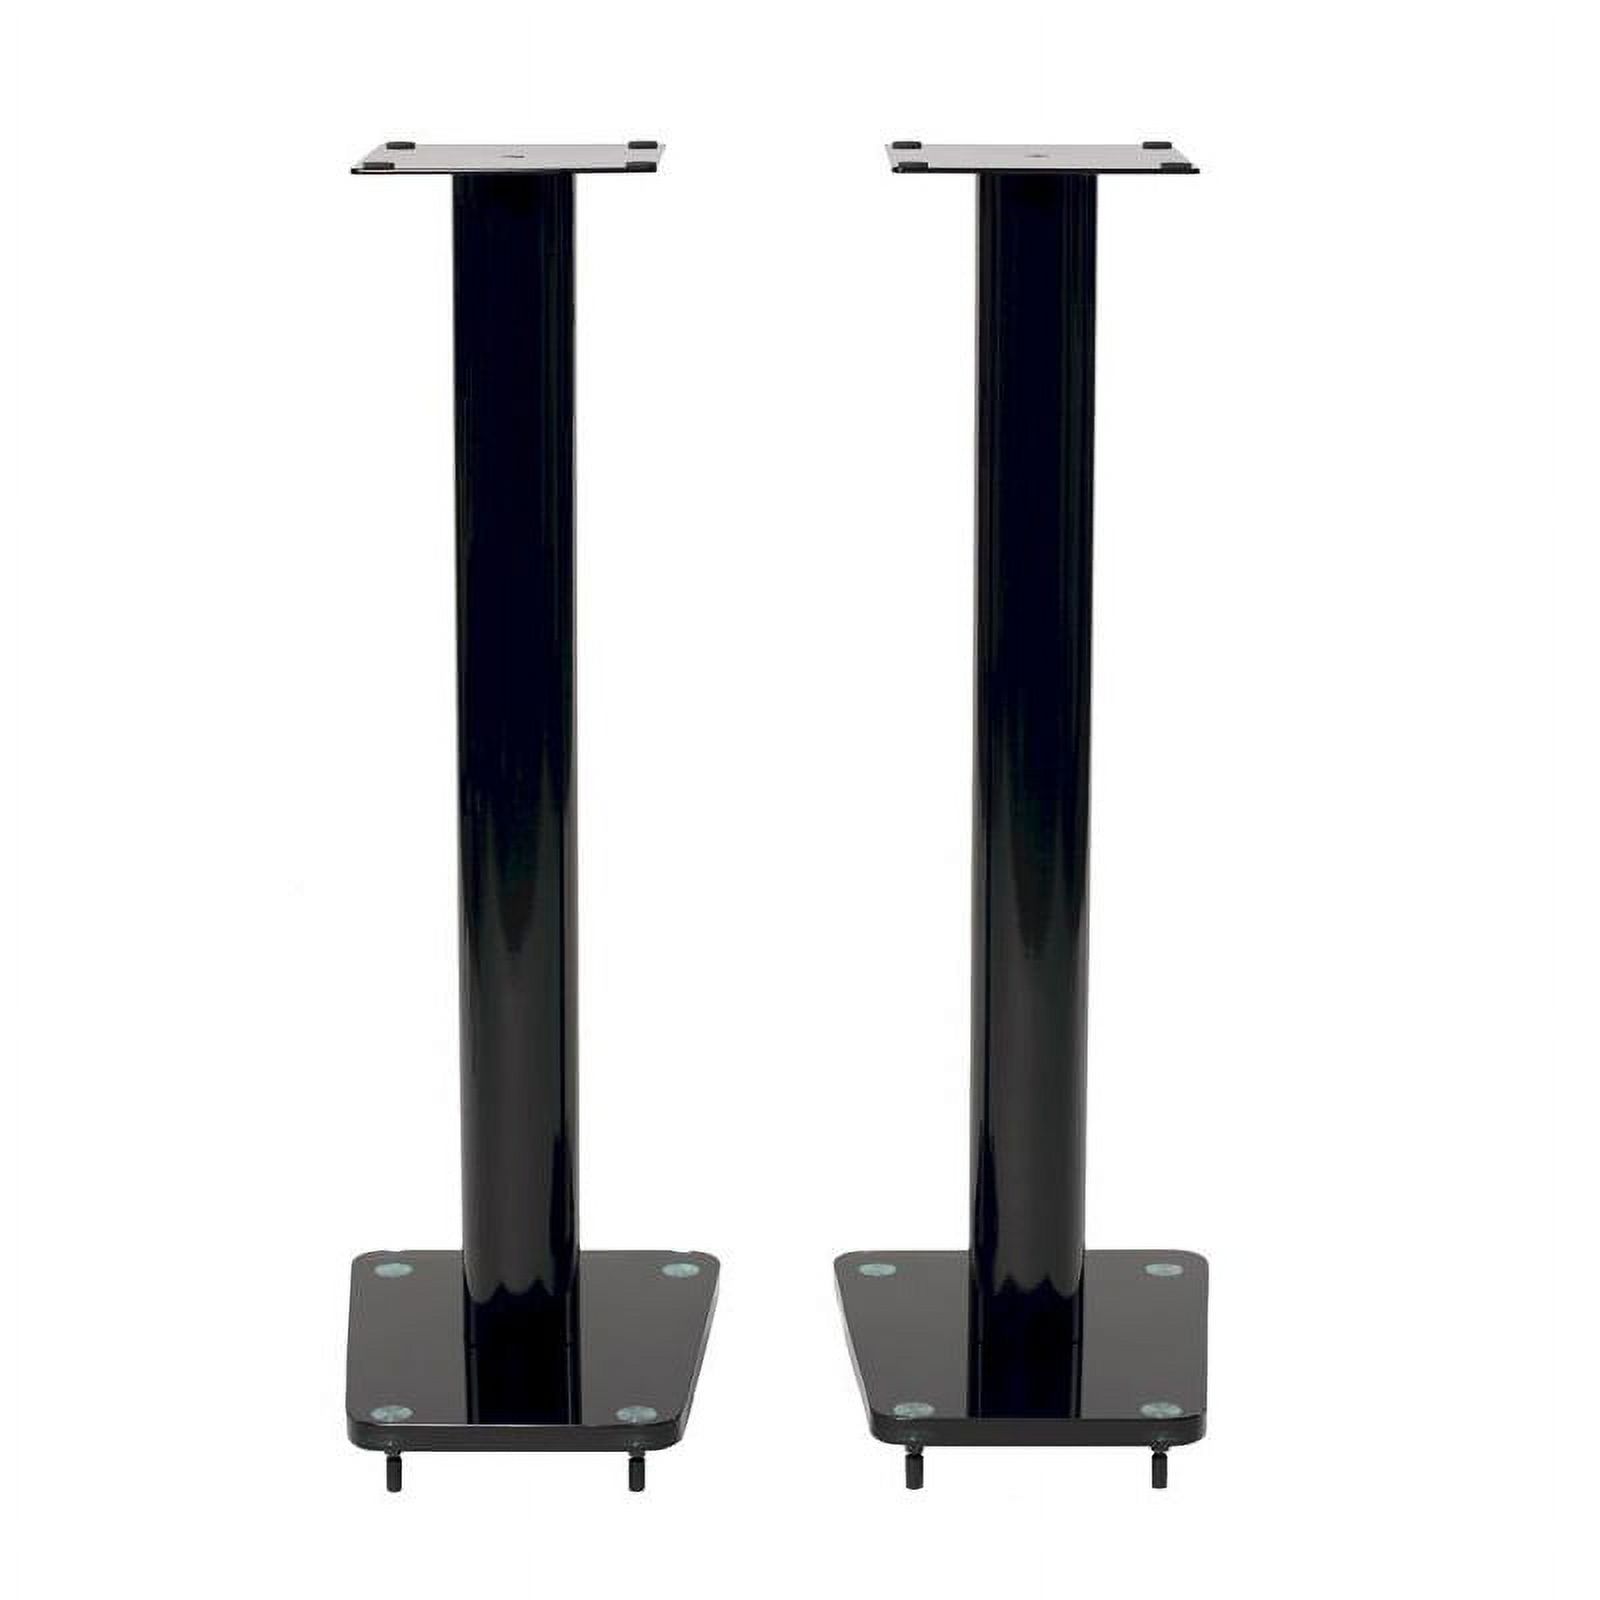 32" Tempered glass & metal speaker stand in Gloss Black finish. Sold as pair - image 1 of 2